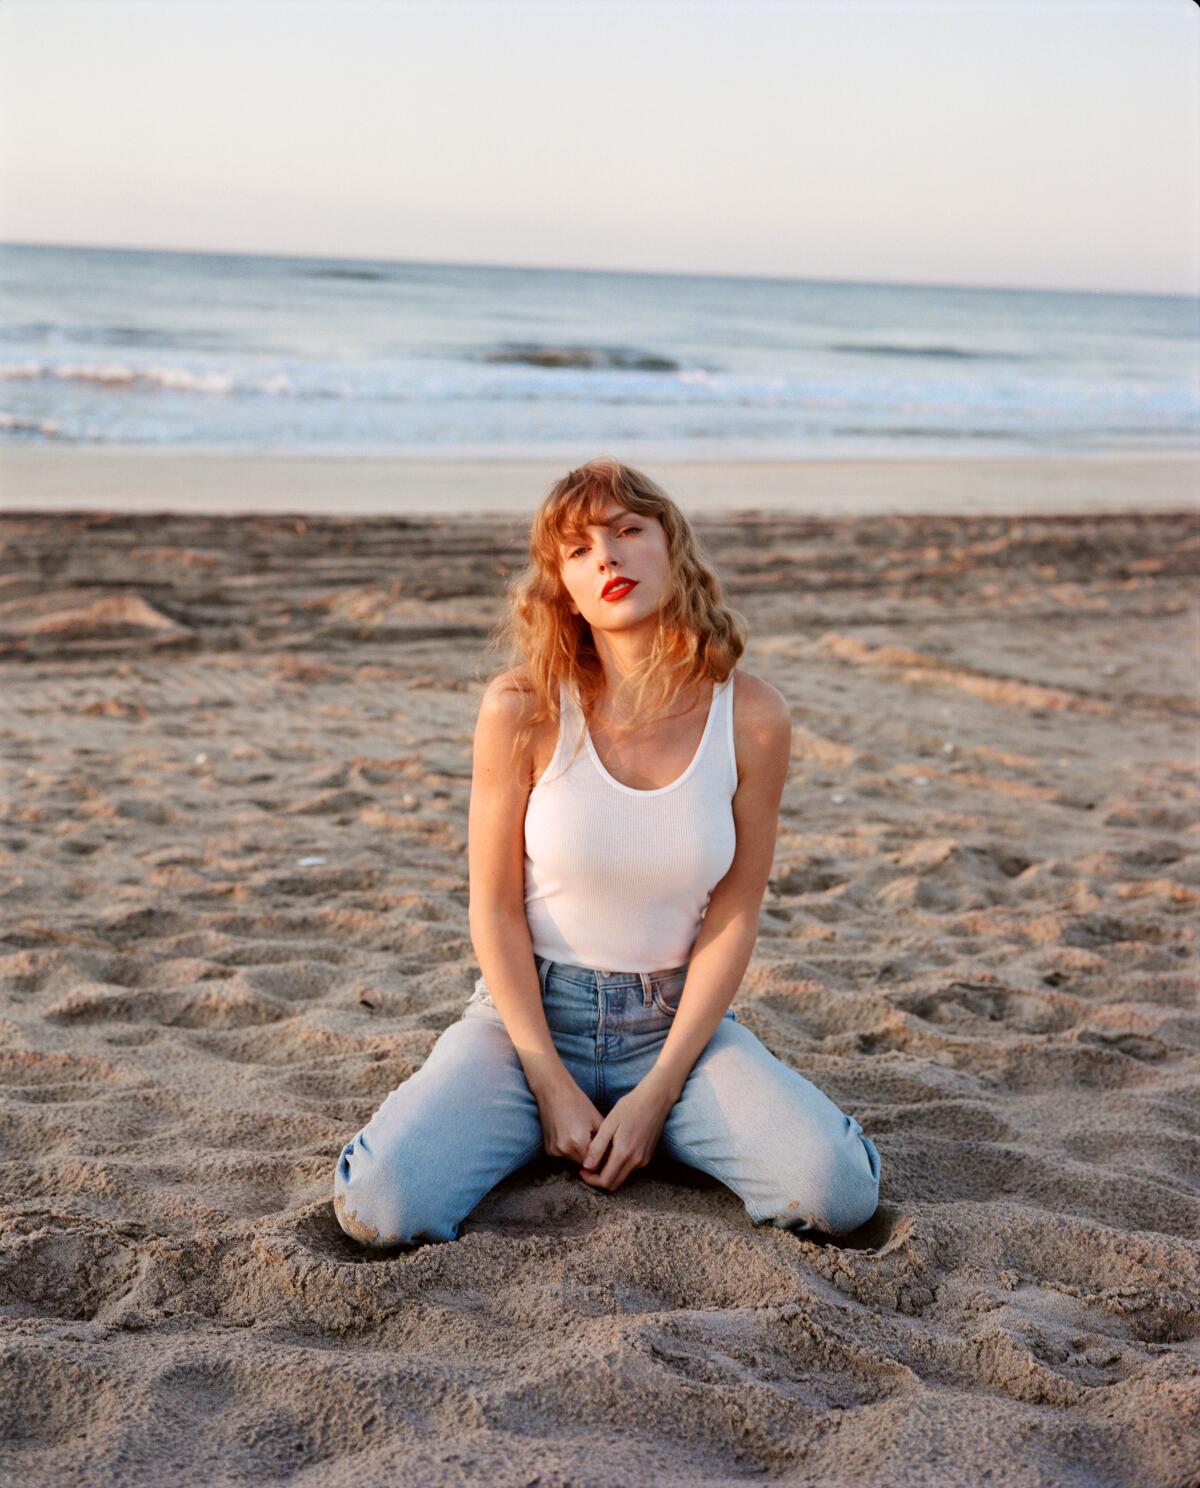 Taylor Swift '1989 (Taylor's Version)' - News, Release Date